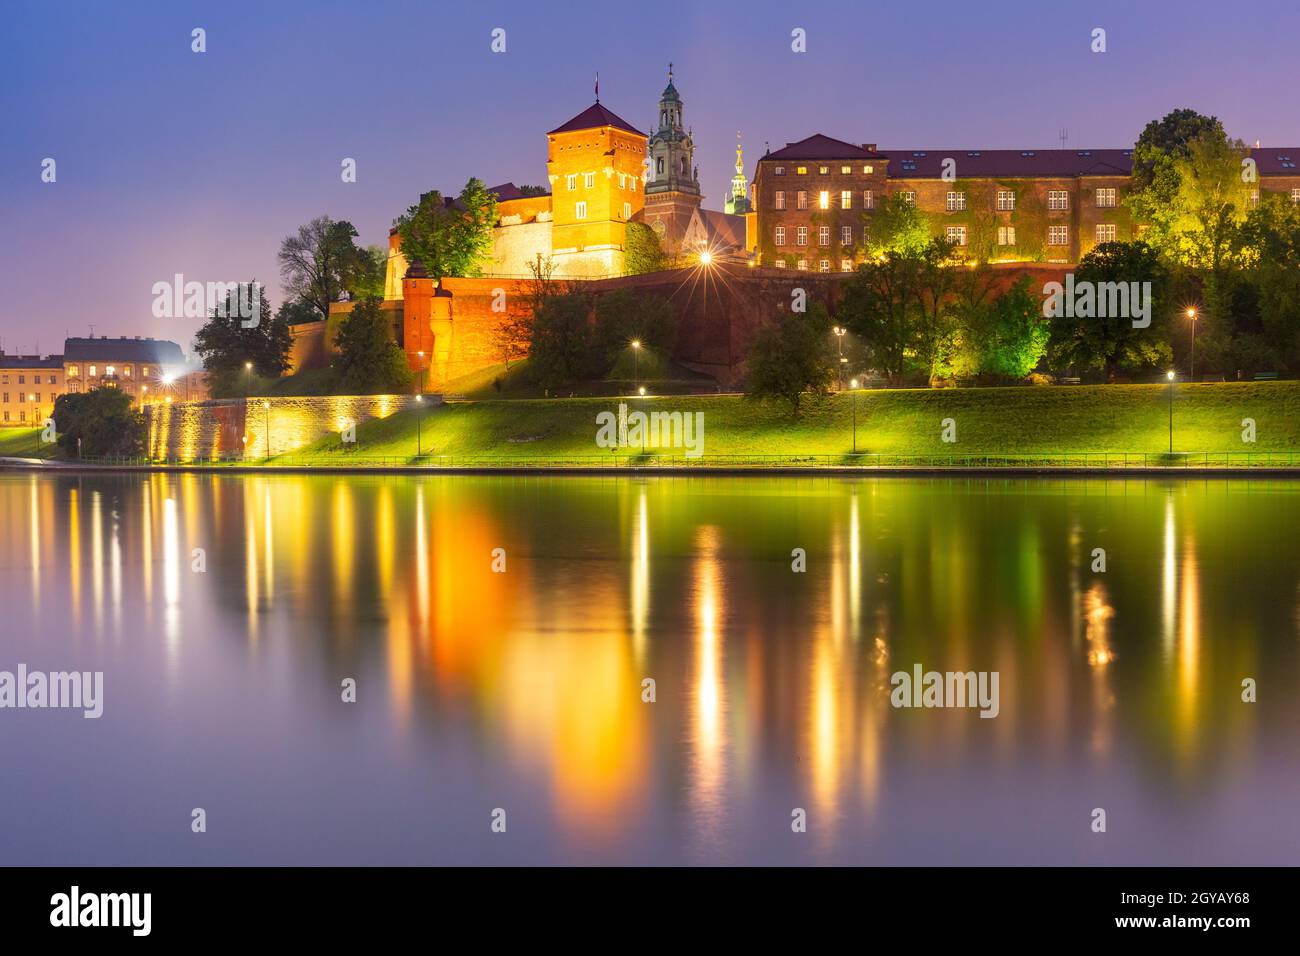 Panorama of Wawel Hill with reflection in the river at night as seen from the Vistula, Krakow, Poland Stock Photo